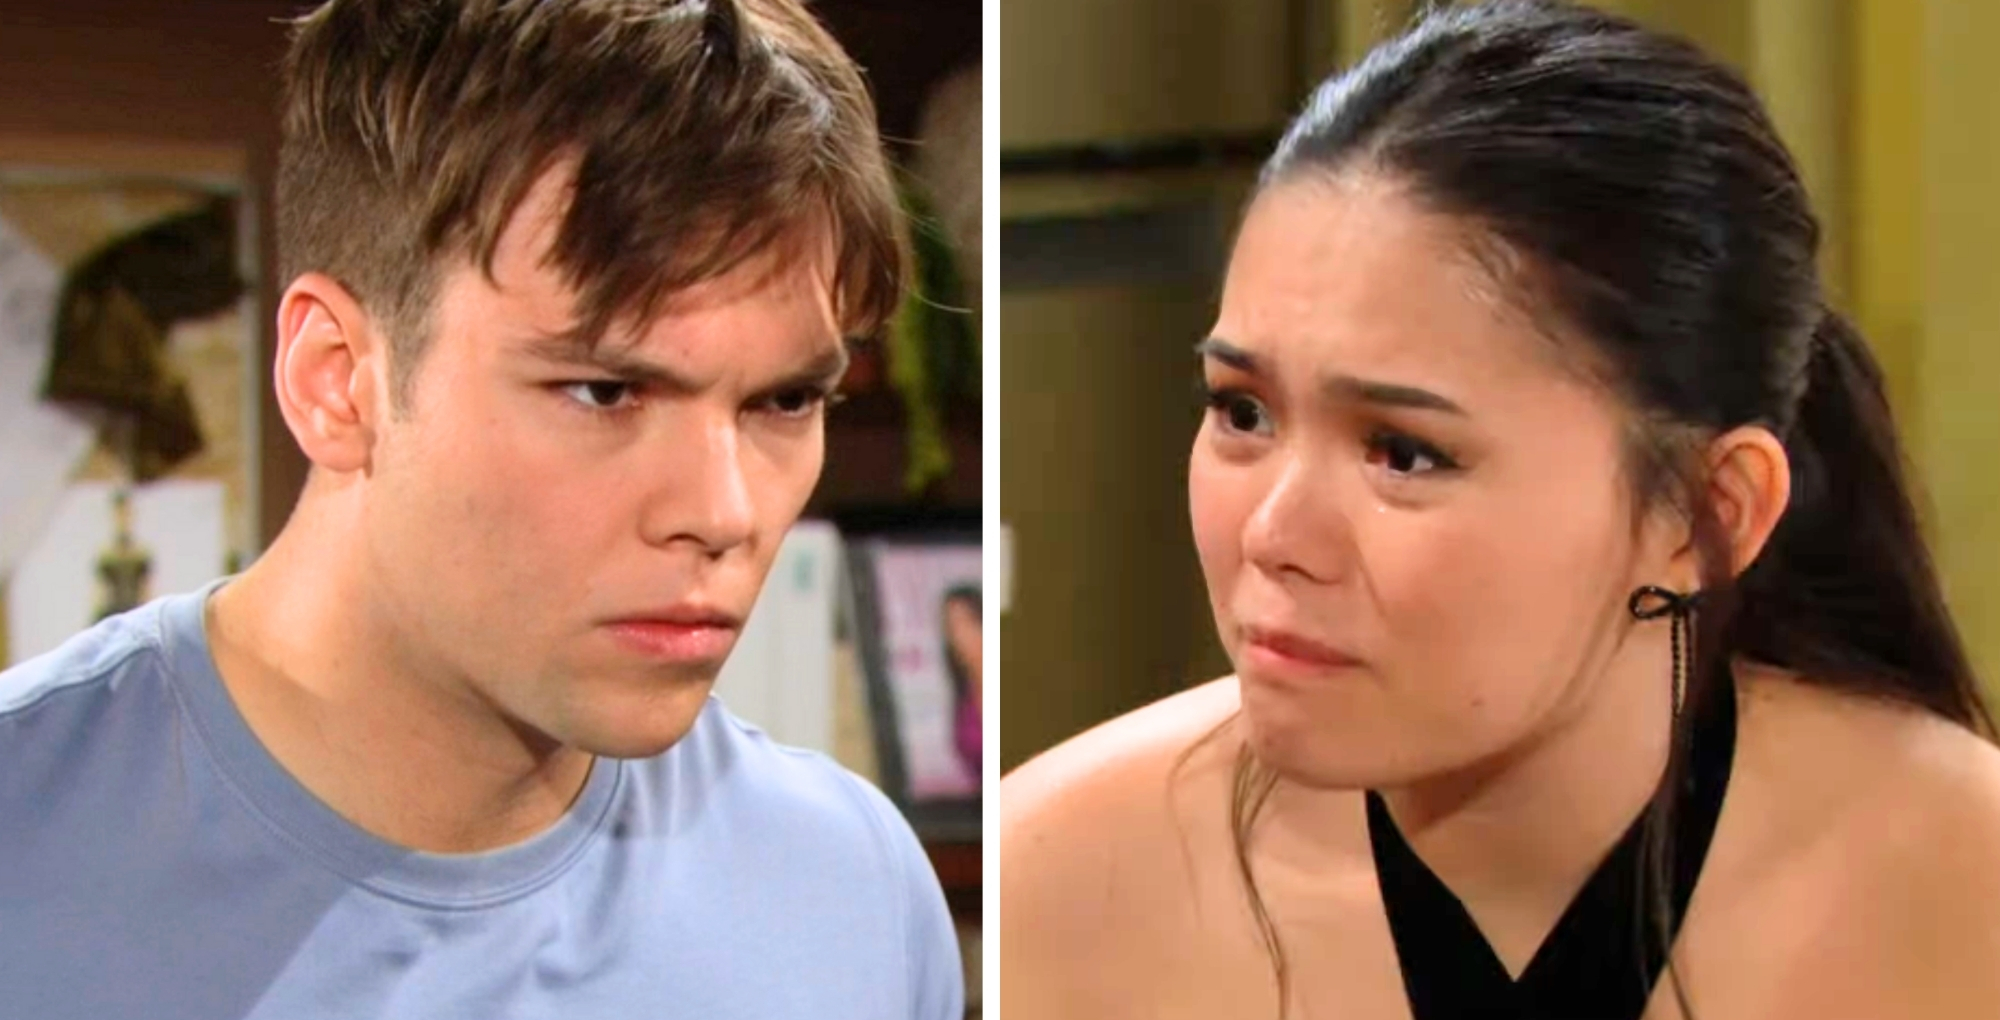 Bold and the Beautiful Spoilers for Friday, March 8 Episode 9226 feature RJ and Luna.